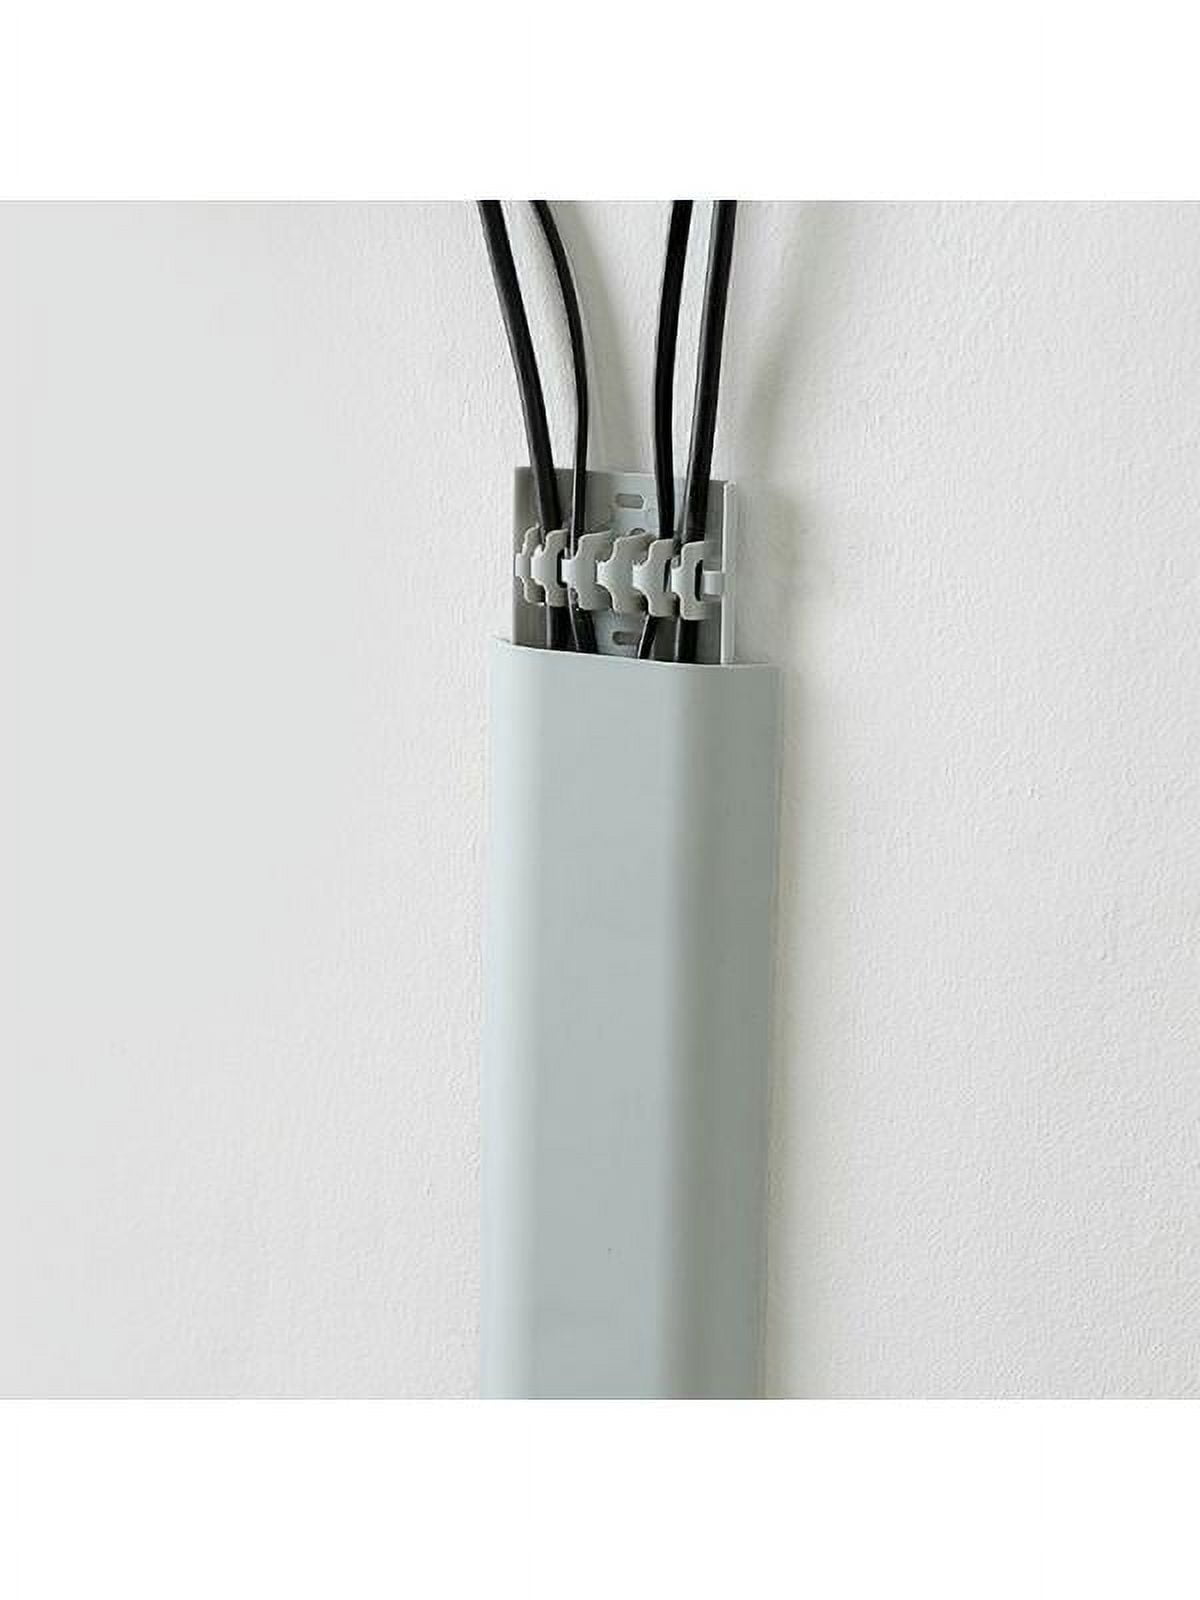 Wall Wire Hider Cable Raceway